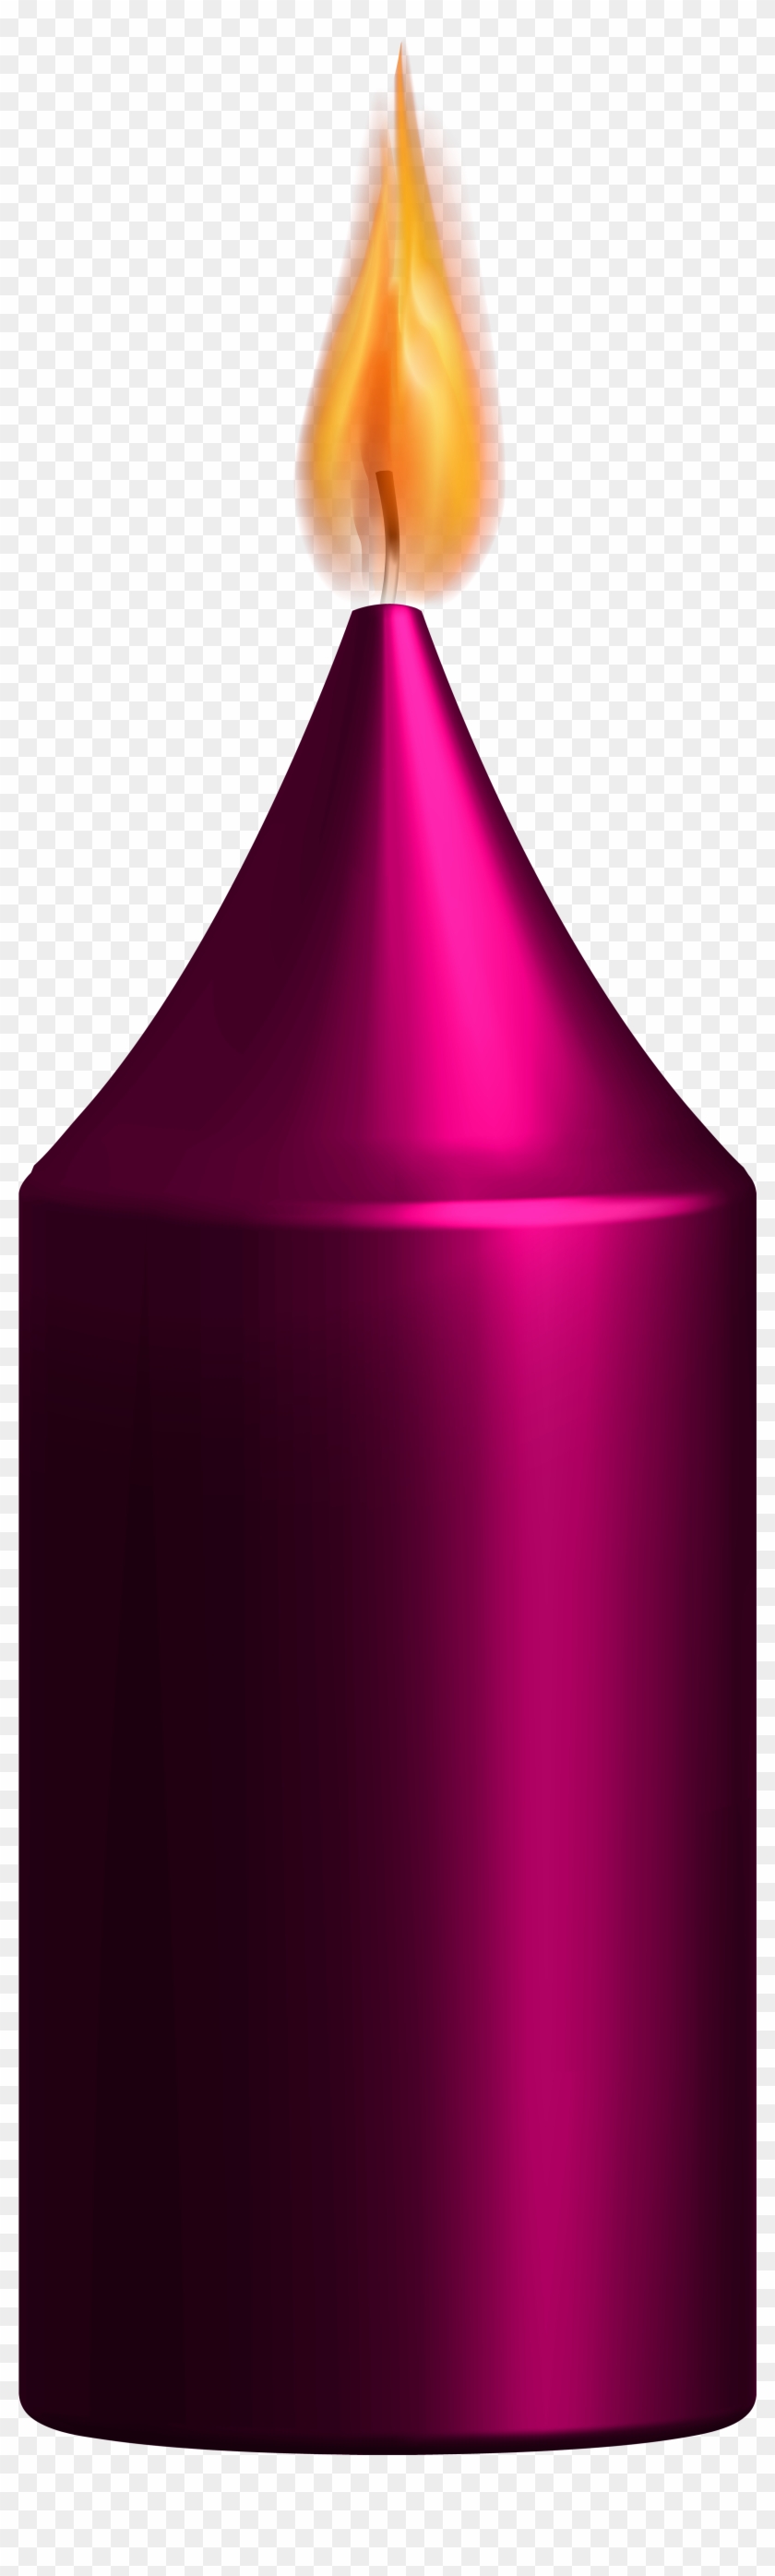 Pink Candle Png Clip Art - Tent #306276